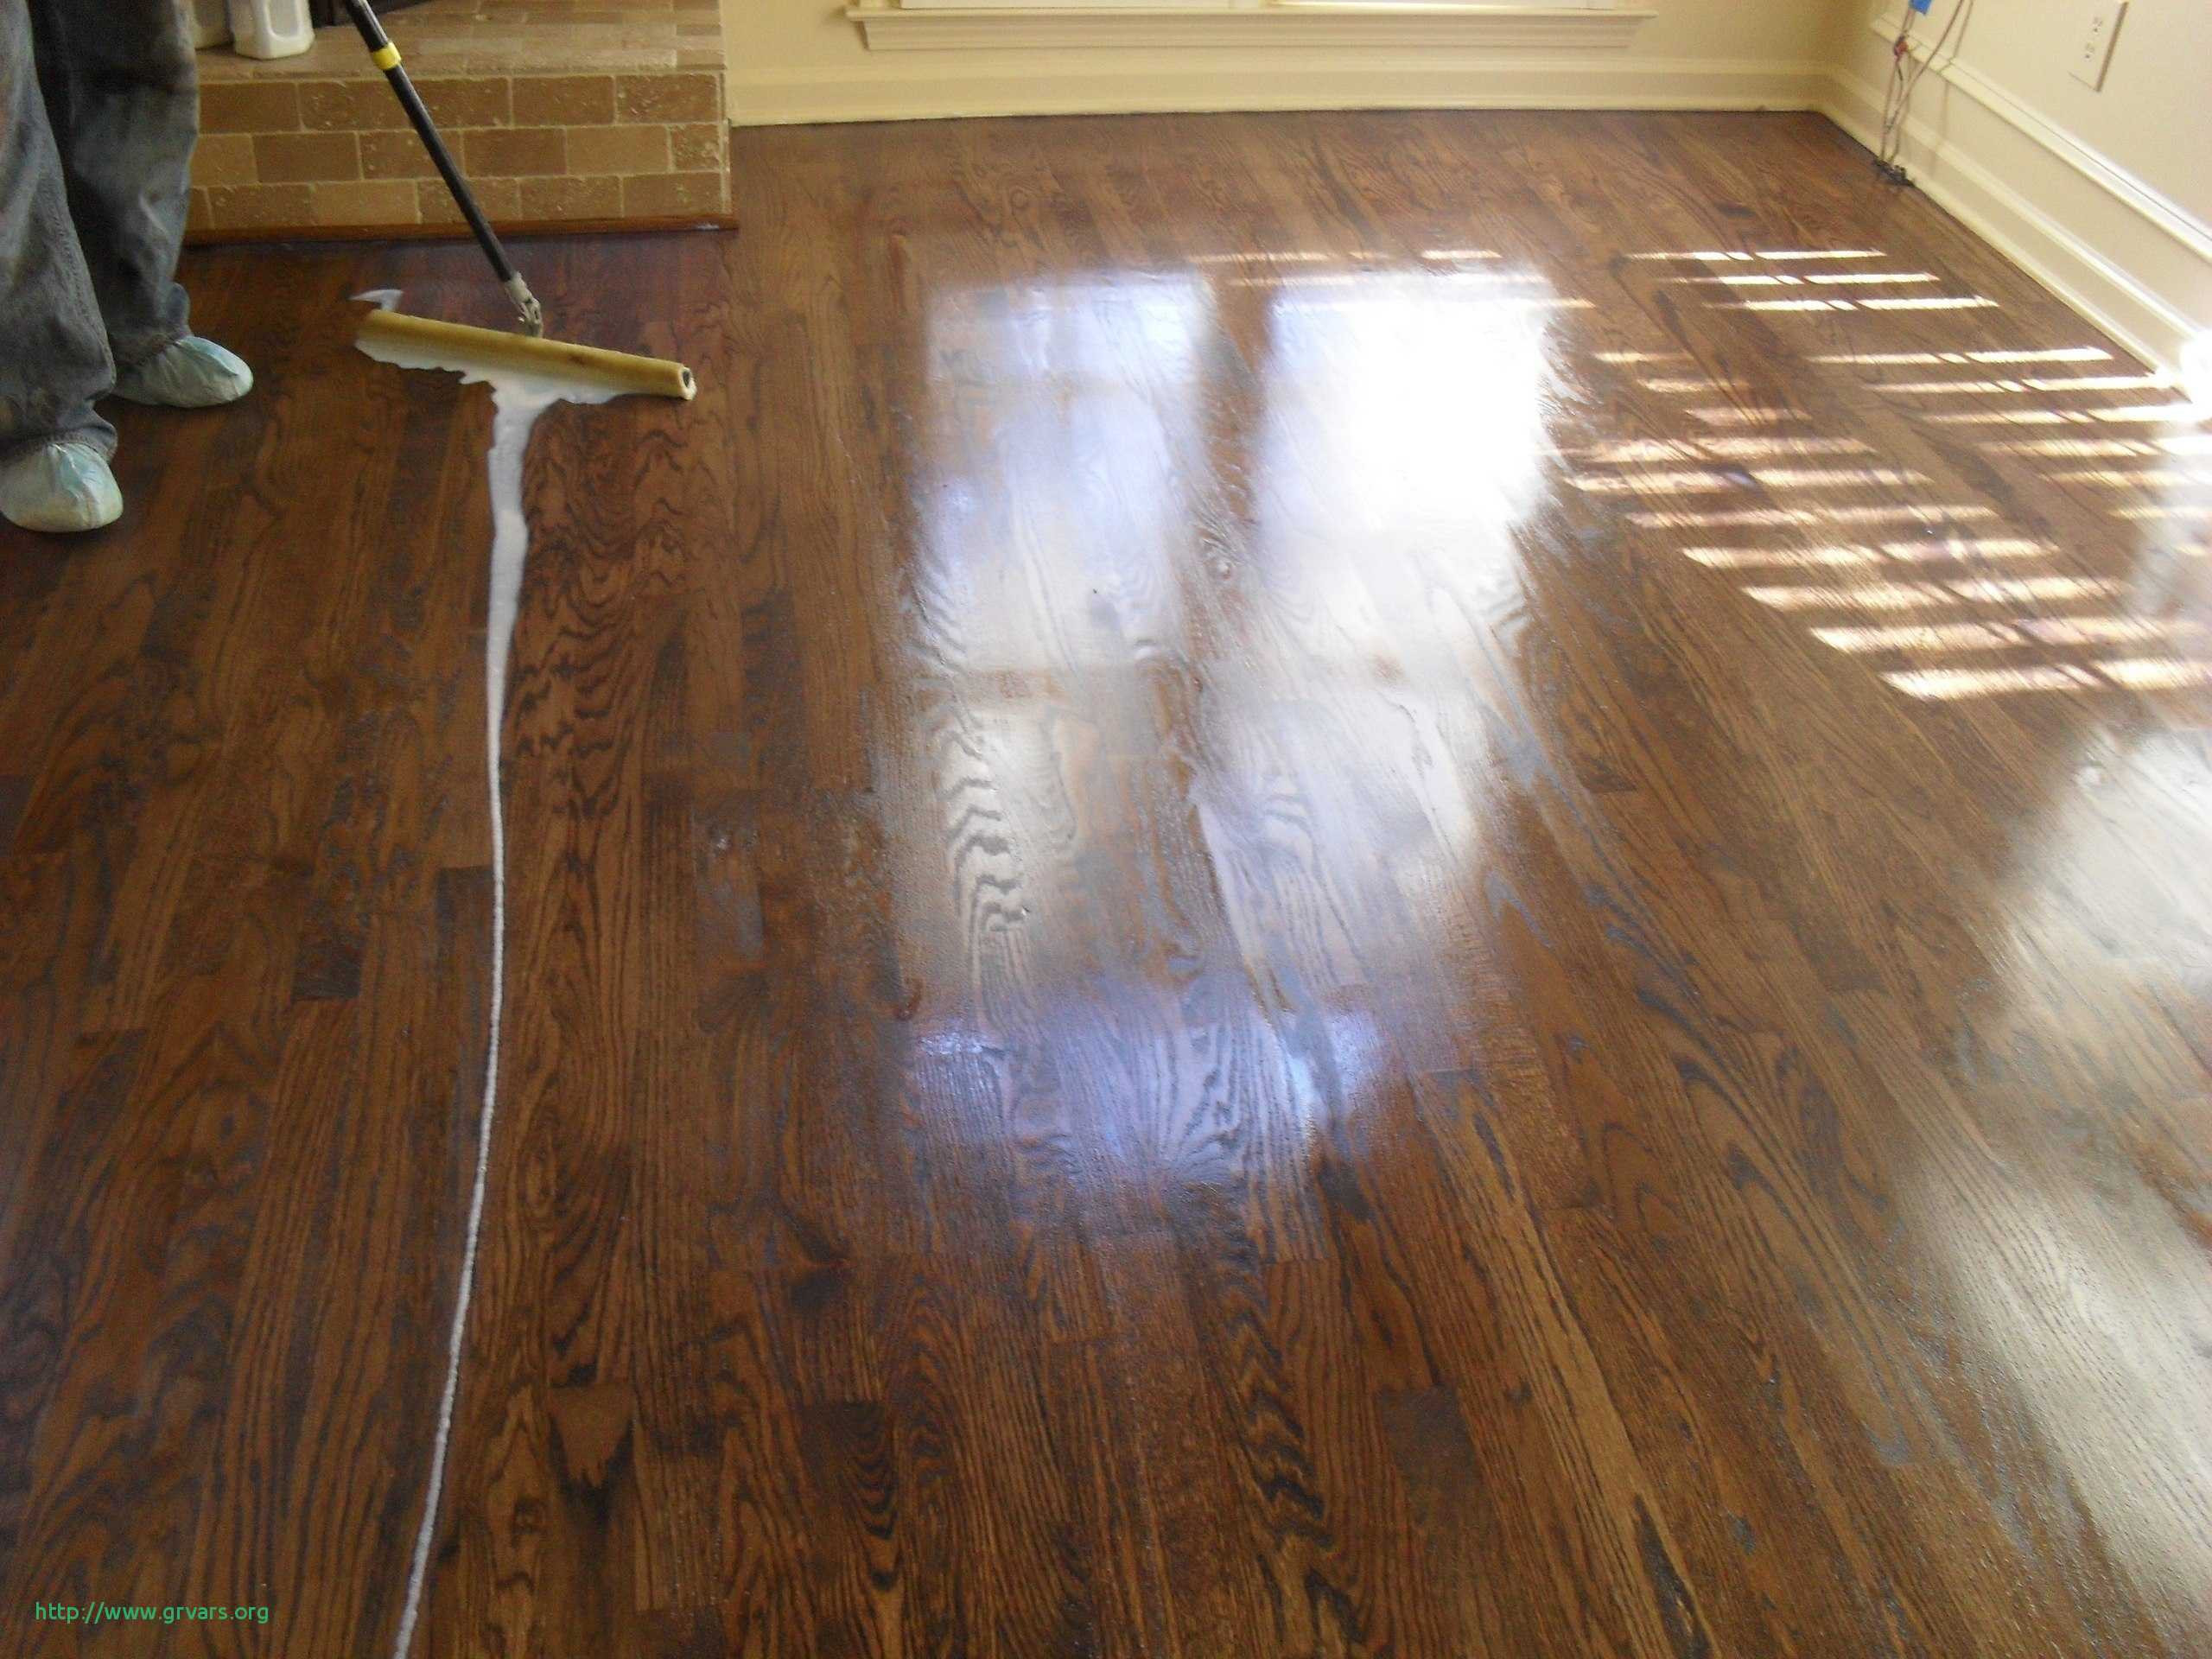 18 Wonderful How to Keep Hardwood Floors Shiny 2024 free download how to keep hardwood floors shiny of image number 6563 from post restoring old hardwood floors will with nouveau hardwood floors yourself ideas restoring old will inspirant redo without sand